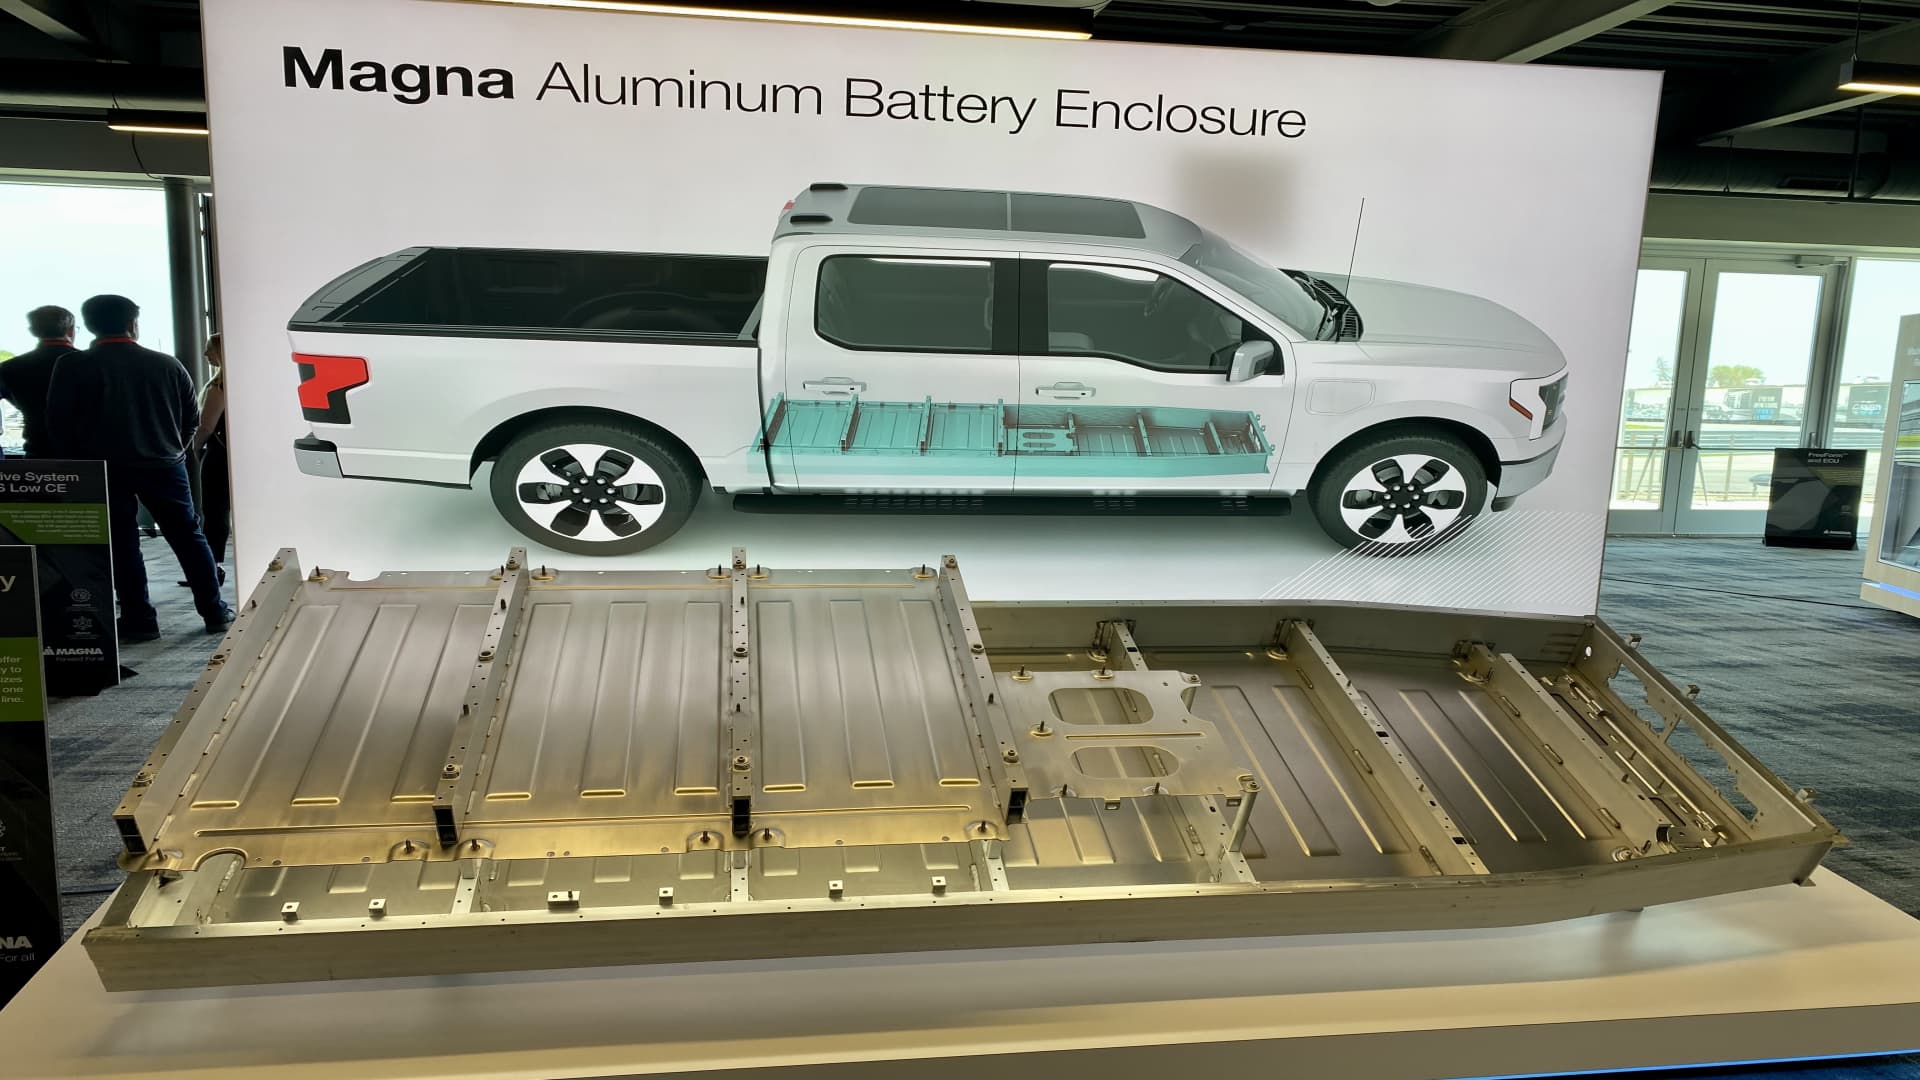 Ford reassures investors it has the battery supplies it needs for ambitious EV goals